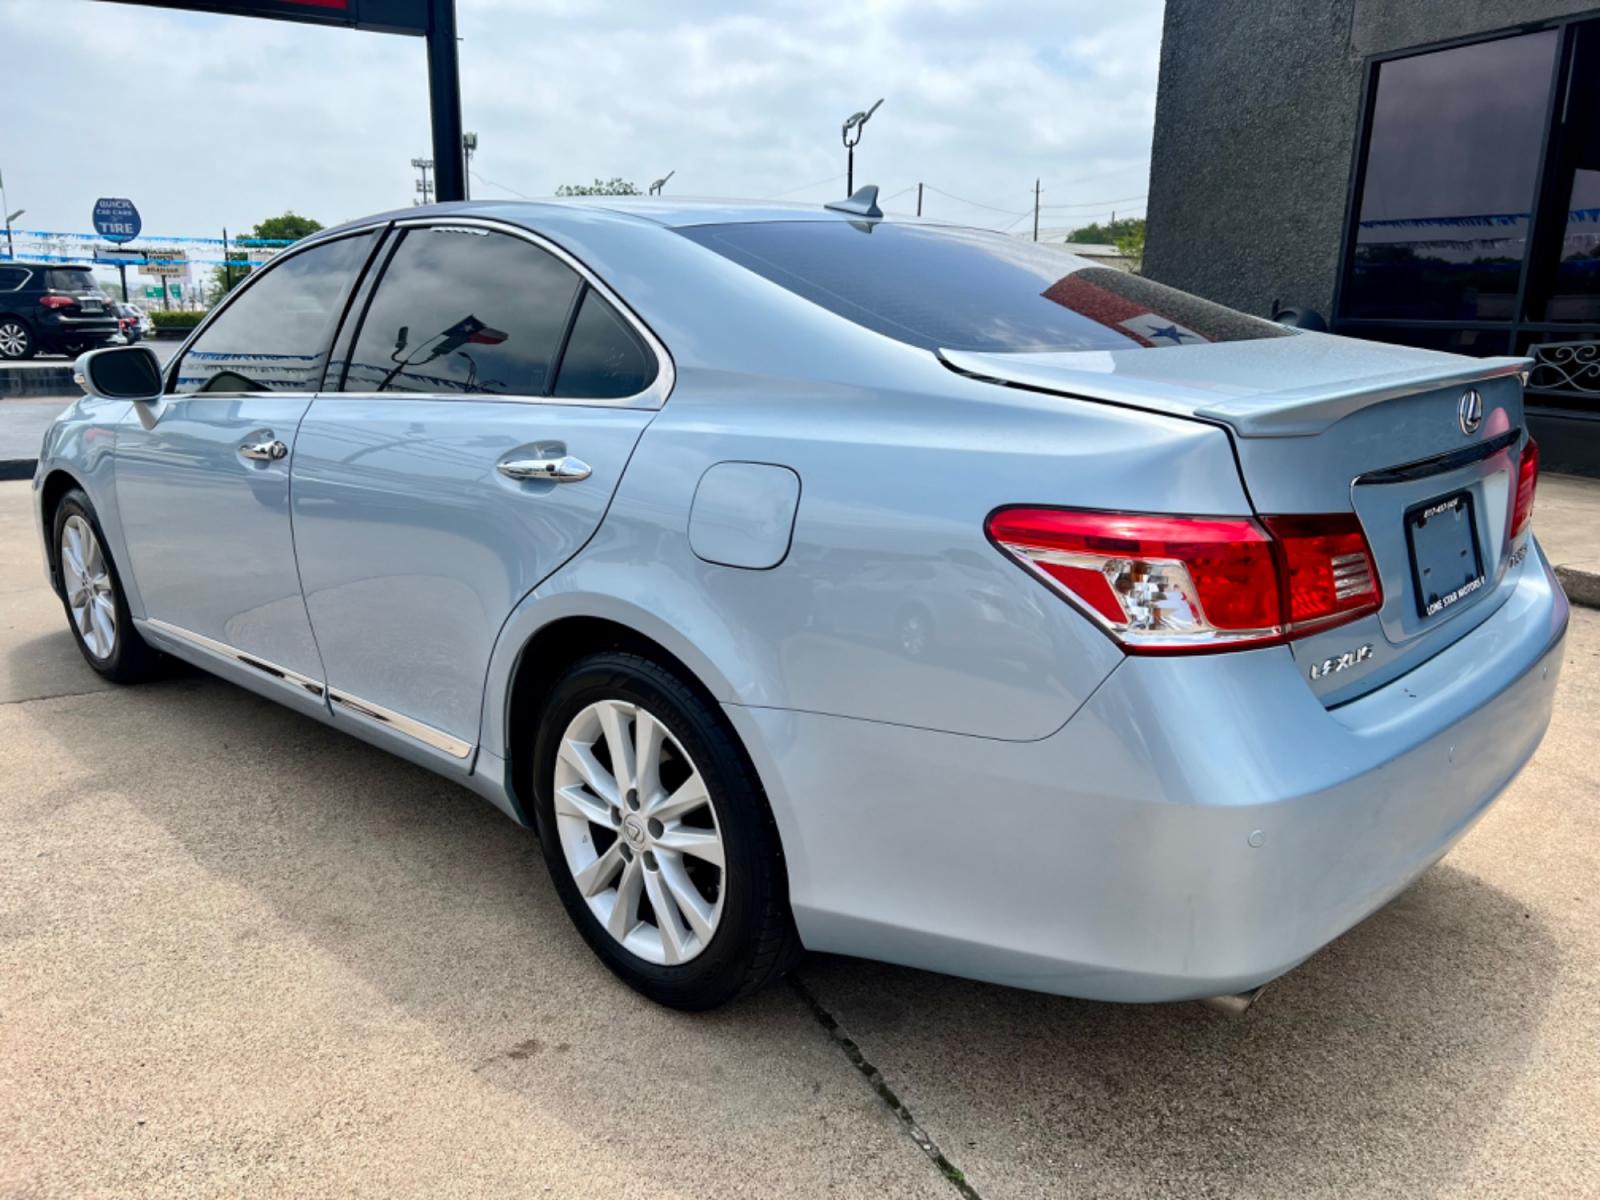 2010 BLUE /Tan LEXUS ES 350 BASE Base 4dr Sedan (JTHBK1EG3A2) with an 3.5L V6 engine, Automatic 6-Speed transmission, located at 5900 E. Lancaster Ave., Fort Worth, TX, 76112, (817) 457-5456, 0.000000, 0.000000 - Cash CASH CAR ONLY, NO FINANCING AVAILABLE. THIS 2010 LEXUS ES 350 BASE 4 DOOR SEDAN RUNS AND DRIVES GREAT. IT IS EQUIPPED WITH A CD PLAYER, AM/FM RADIO AND AN AUX PORT. THE TIRES ARE IN GOOD CONDITION AND STILL HAVE TREAD LEFT ON THEM. THIS CAR WILL NOT LAST SO ACT FAST! Call or text Fran - Photo #4